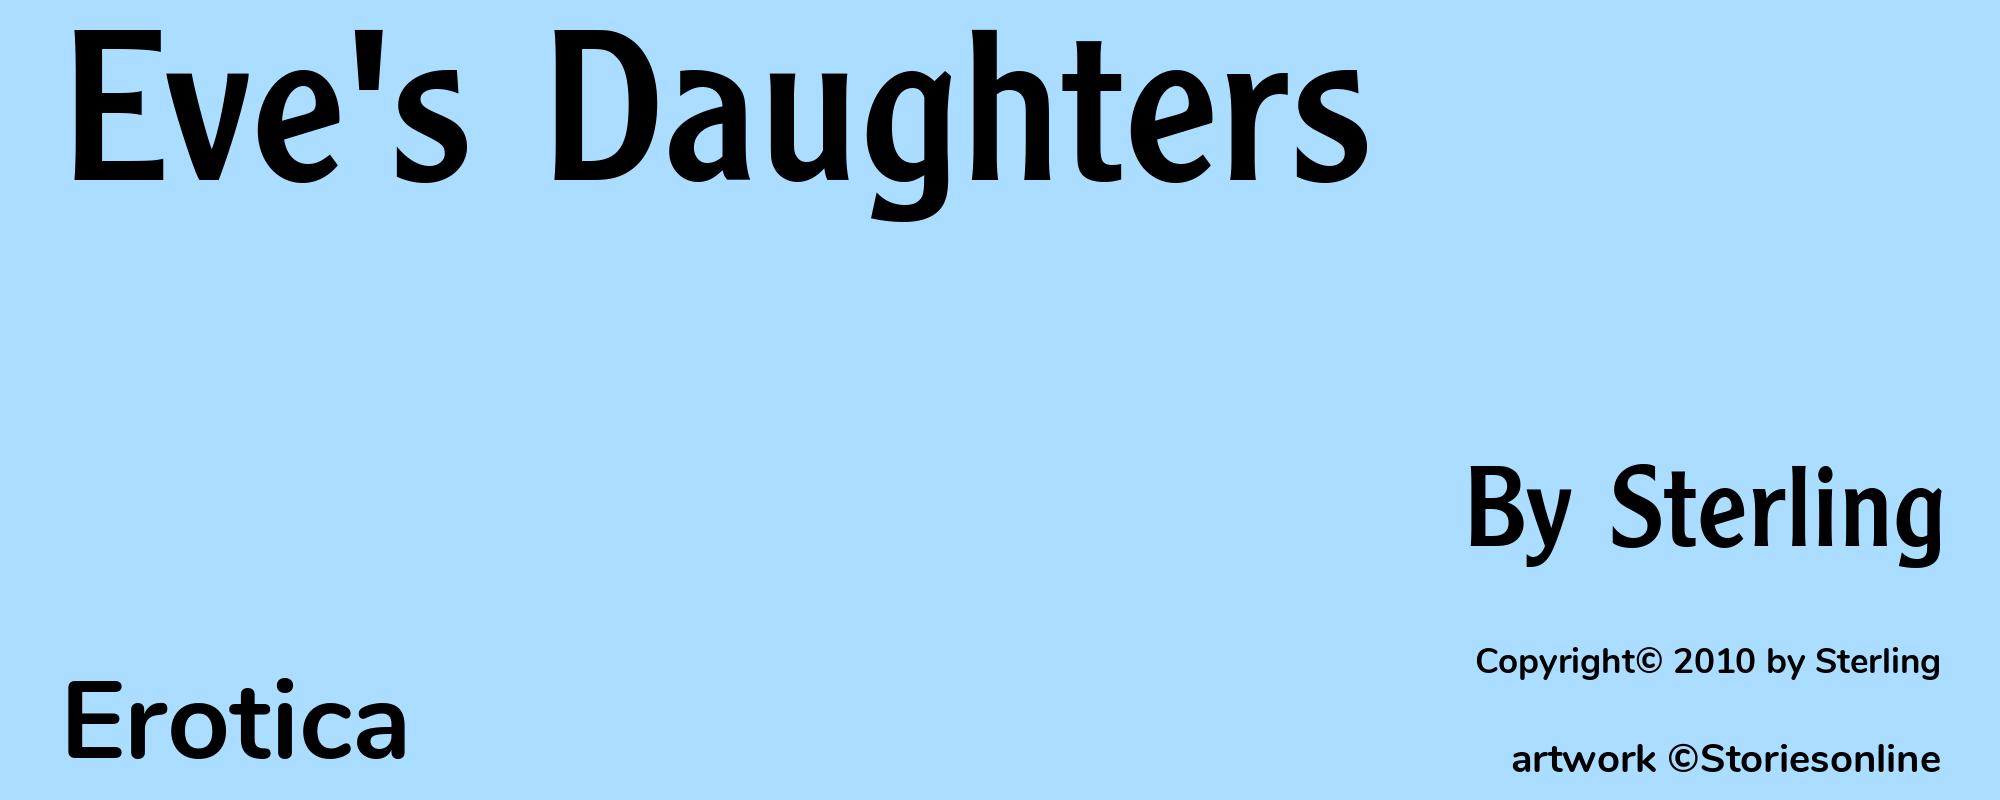 Eve's Daughters - Cover